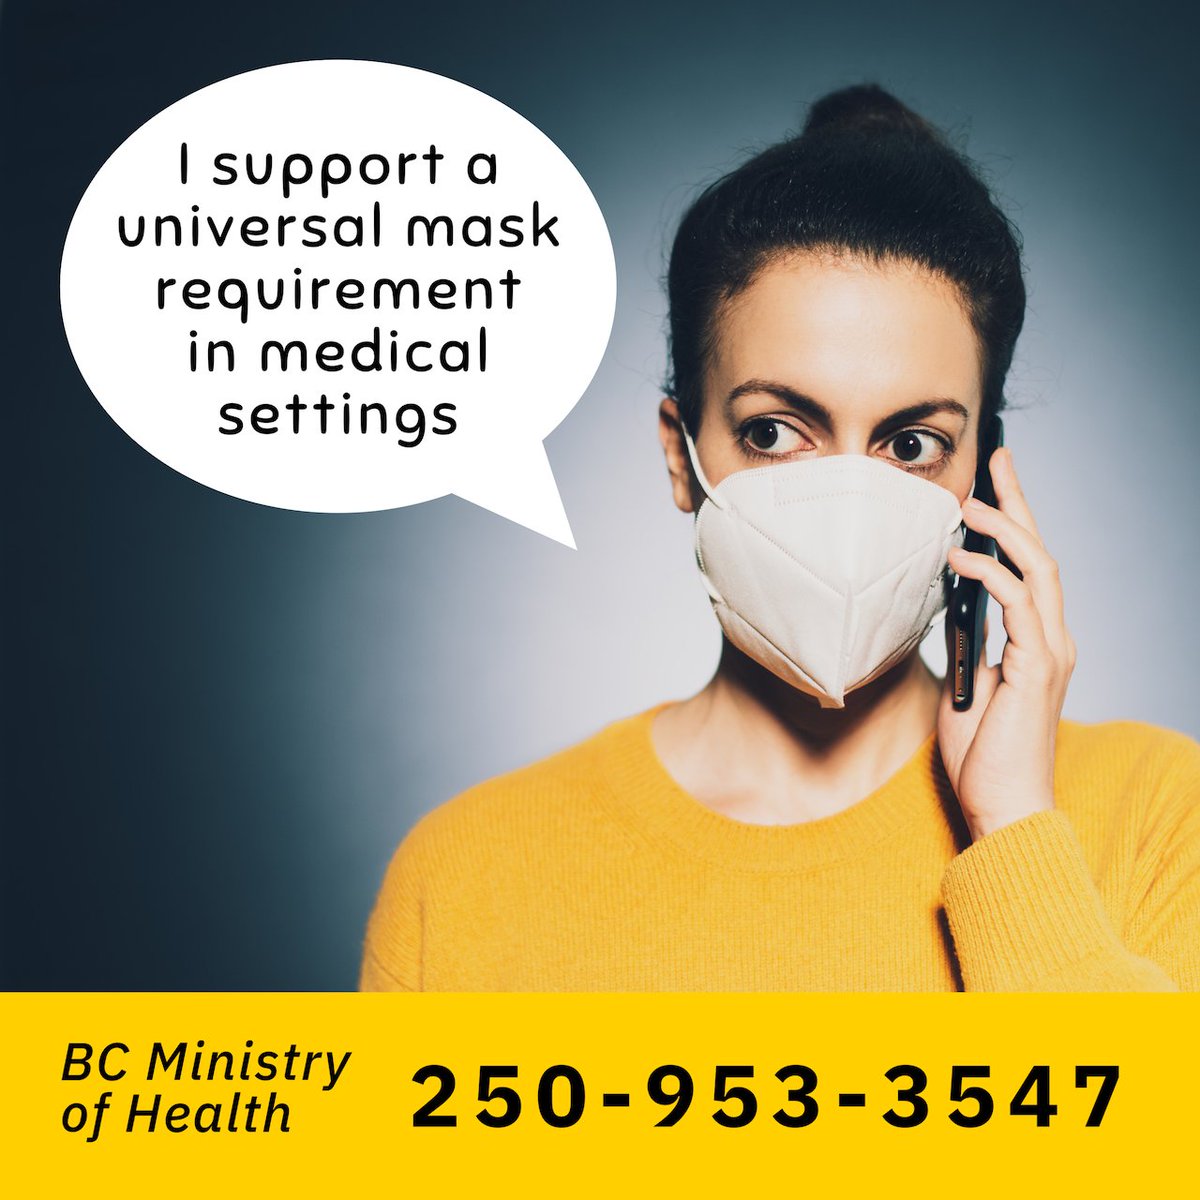 In our latest newsletter:
▪️ Take action: 📞 call @adriandix & the MoH
▪️ Update on #Postcards4PublicHealth
▪️ News coverage of #DoNoHarmBC
▪️ Interview at #BCdisability
▪️ Are masks 😷 returning to #BChealthcare?

Read & sign up 👉 mailchi.mp/096f407e8c6b/u…